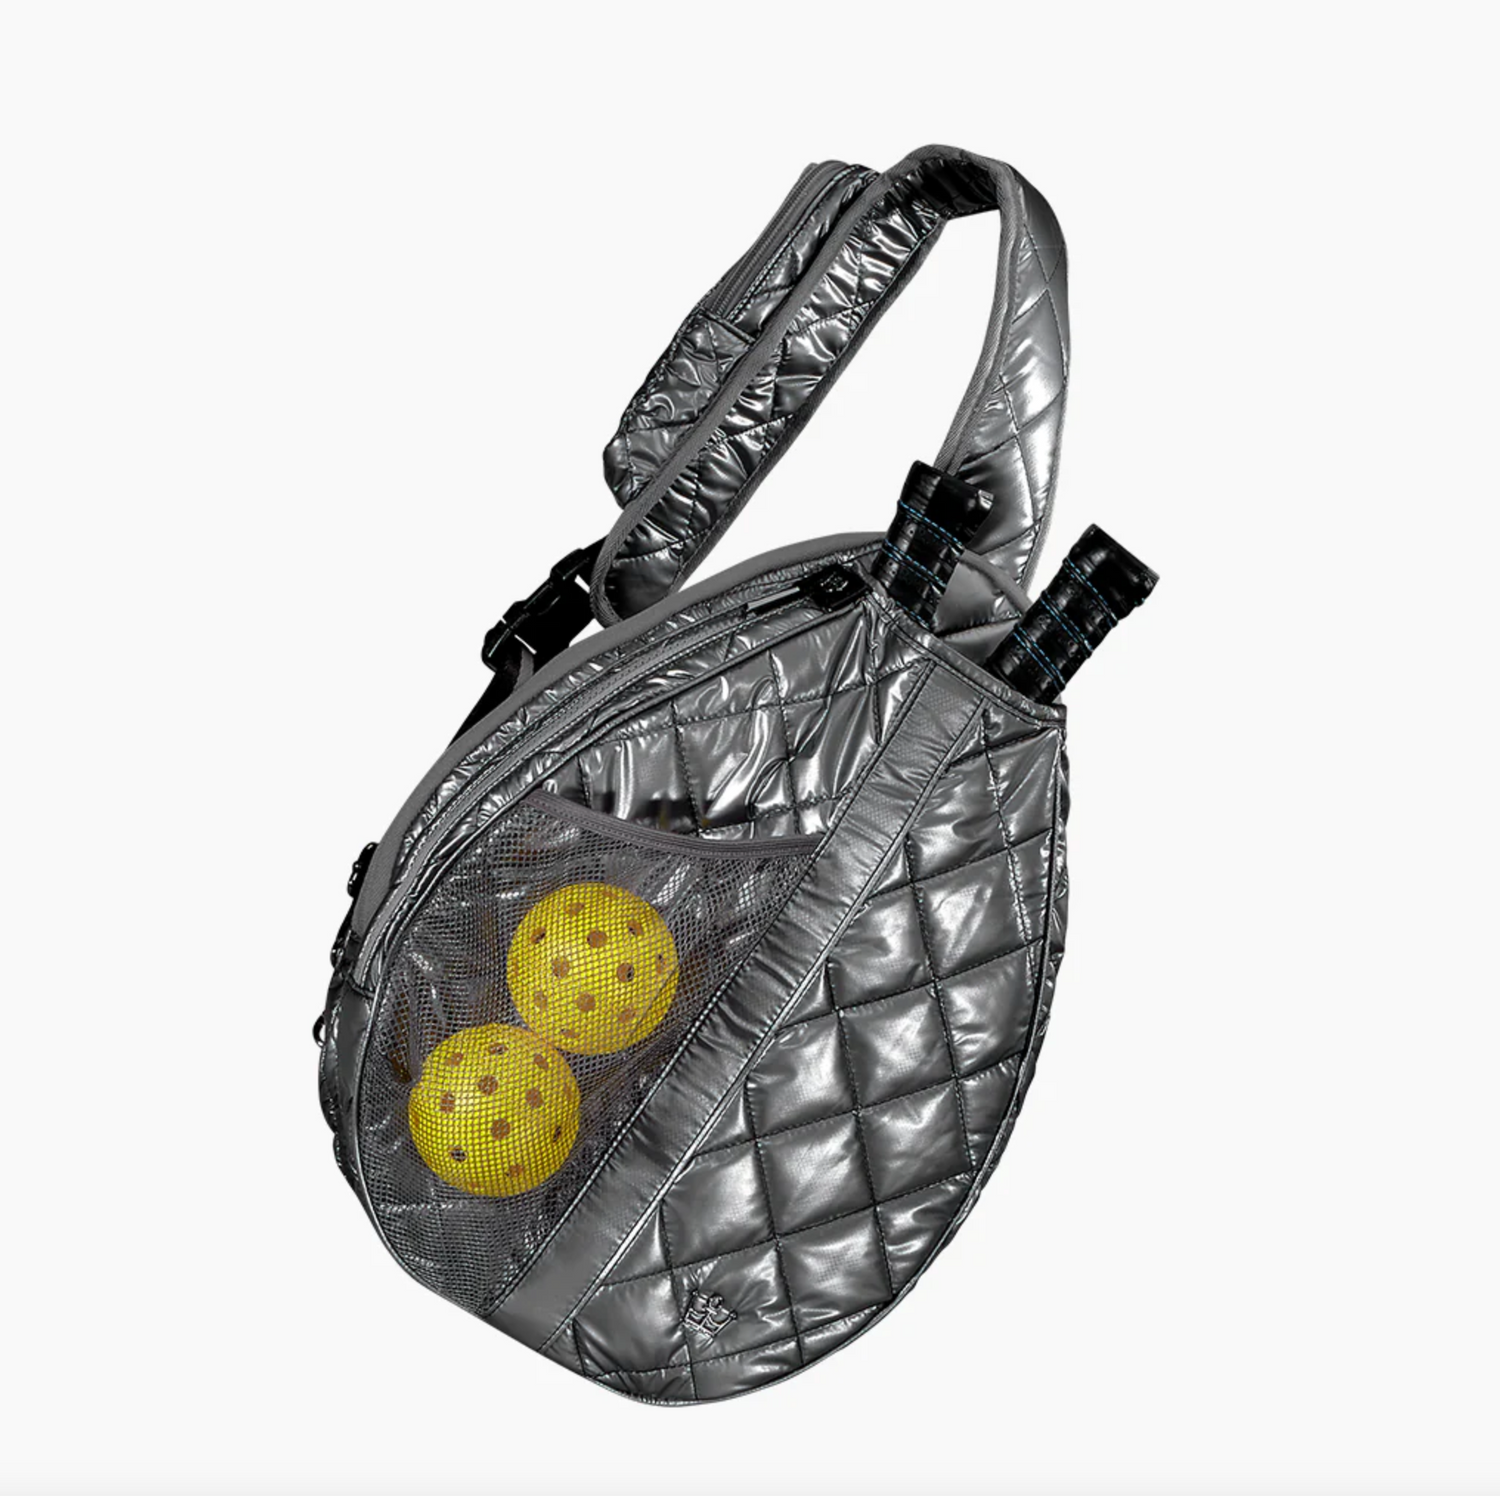 Oliver Thomas Maxed Out Pickle/Tennis Sling Backpacks in Gunmetal at Wrapsody